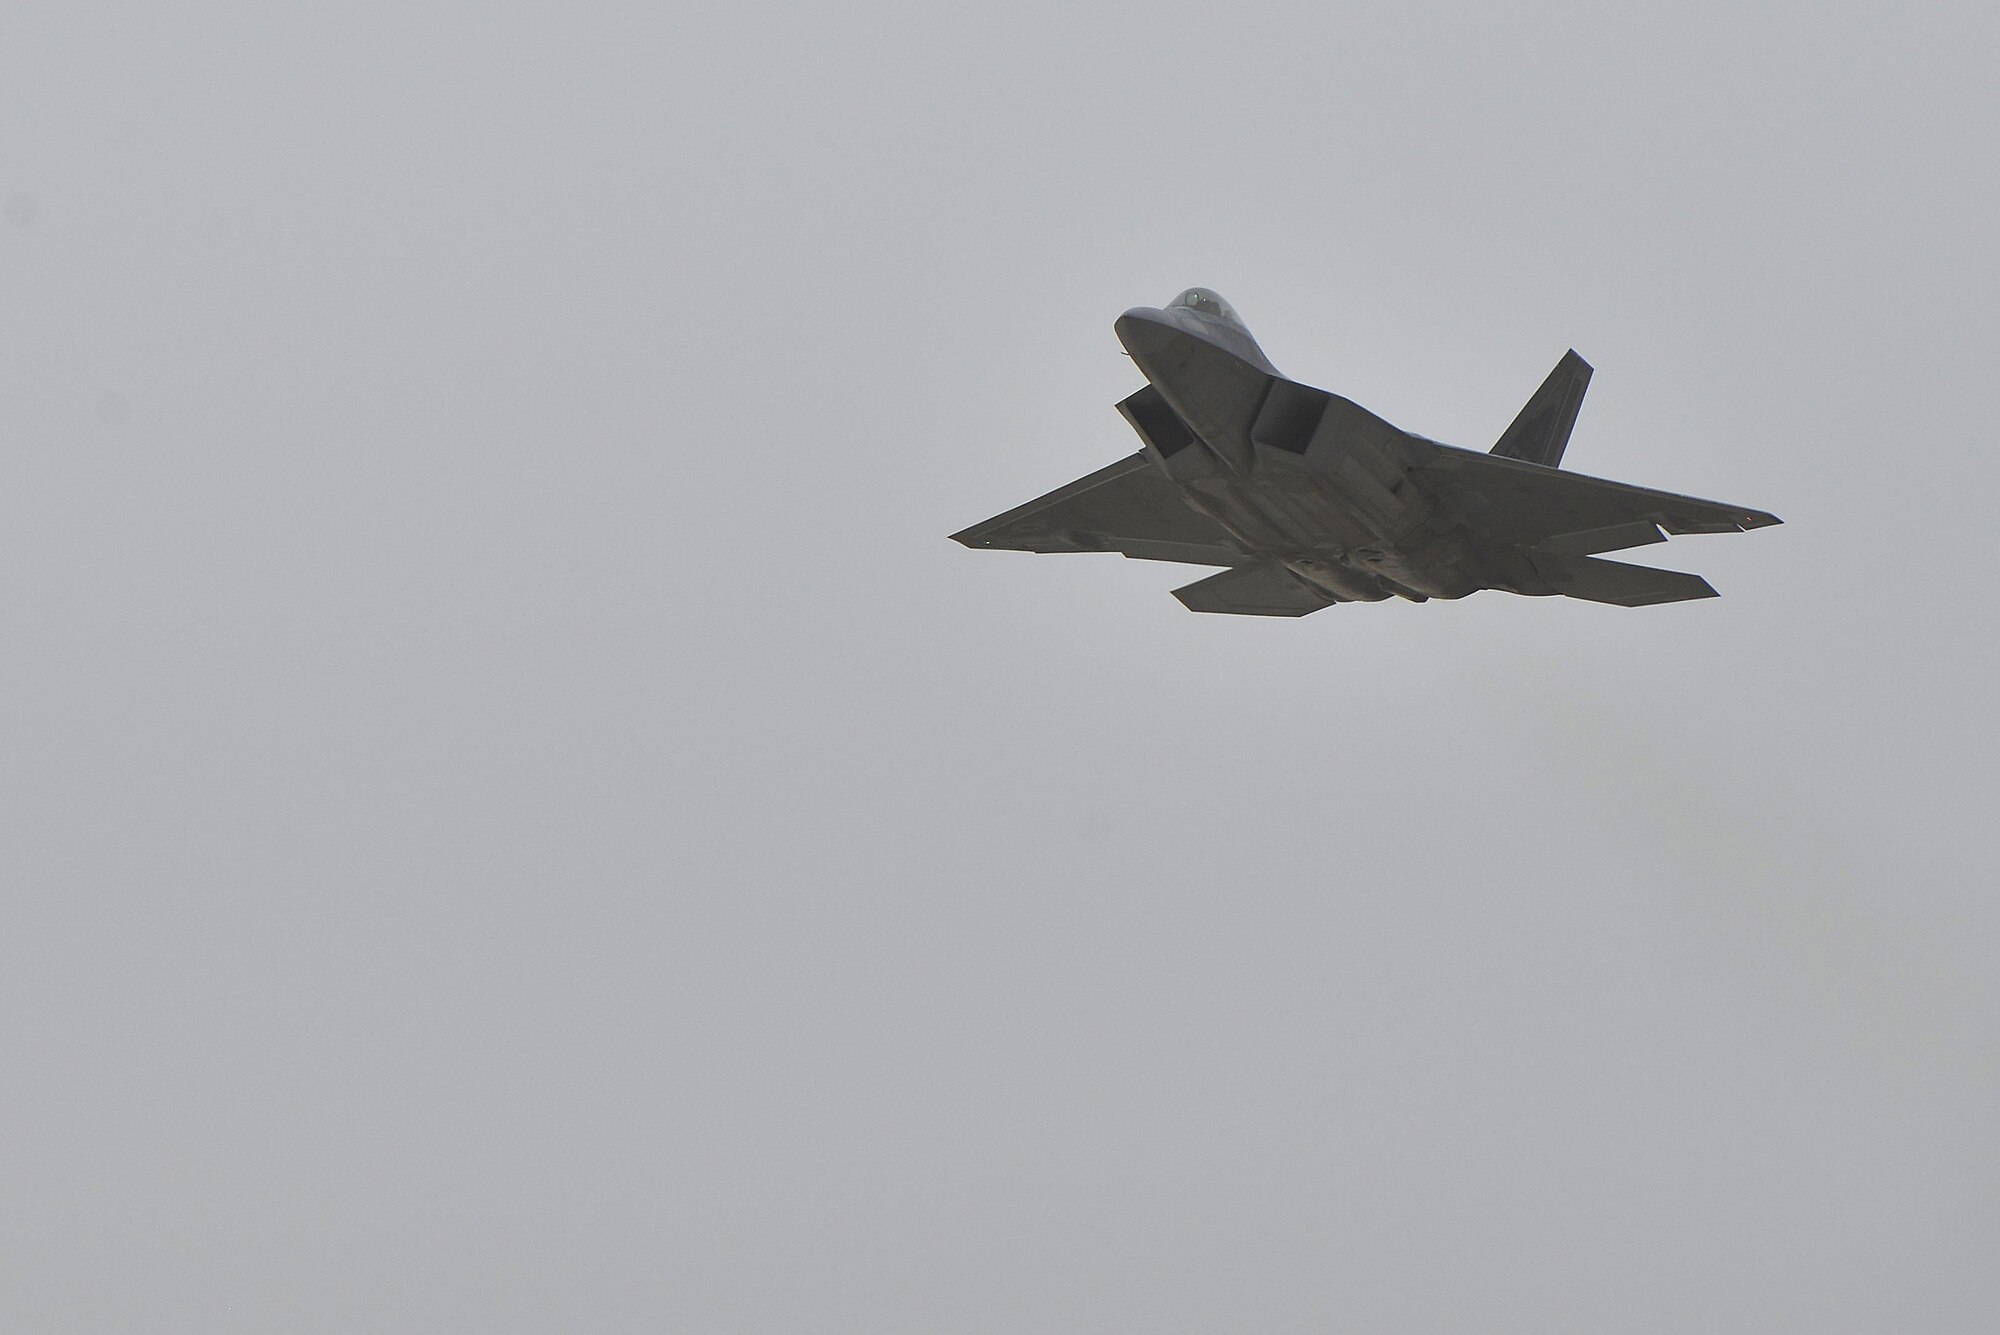 An F-22 Raptor takes off from the runway during a combat sortie at an undisclosed location in Southwest Asia July 9, 2015. The F-22, a critical component of the Global Strike Task Force, is designed to project air dominance, rapidly and at great distances and defeat threats attempting to deny access to our nation's military forces. (U.S. Air Force photo/Tech. Sgt. Christopher Boitz)